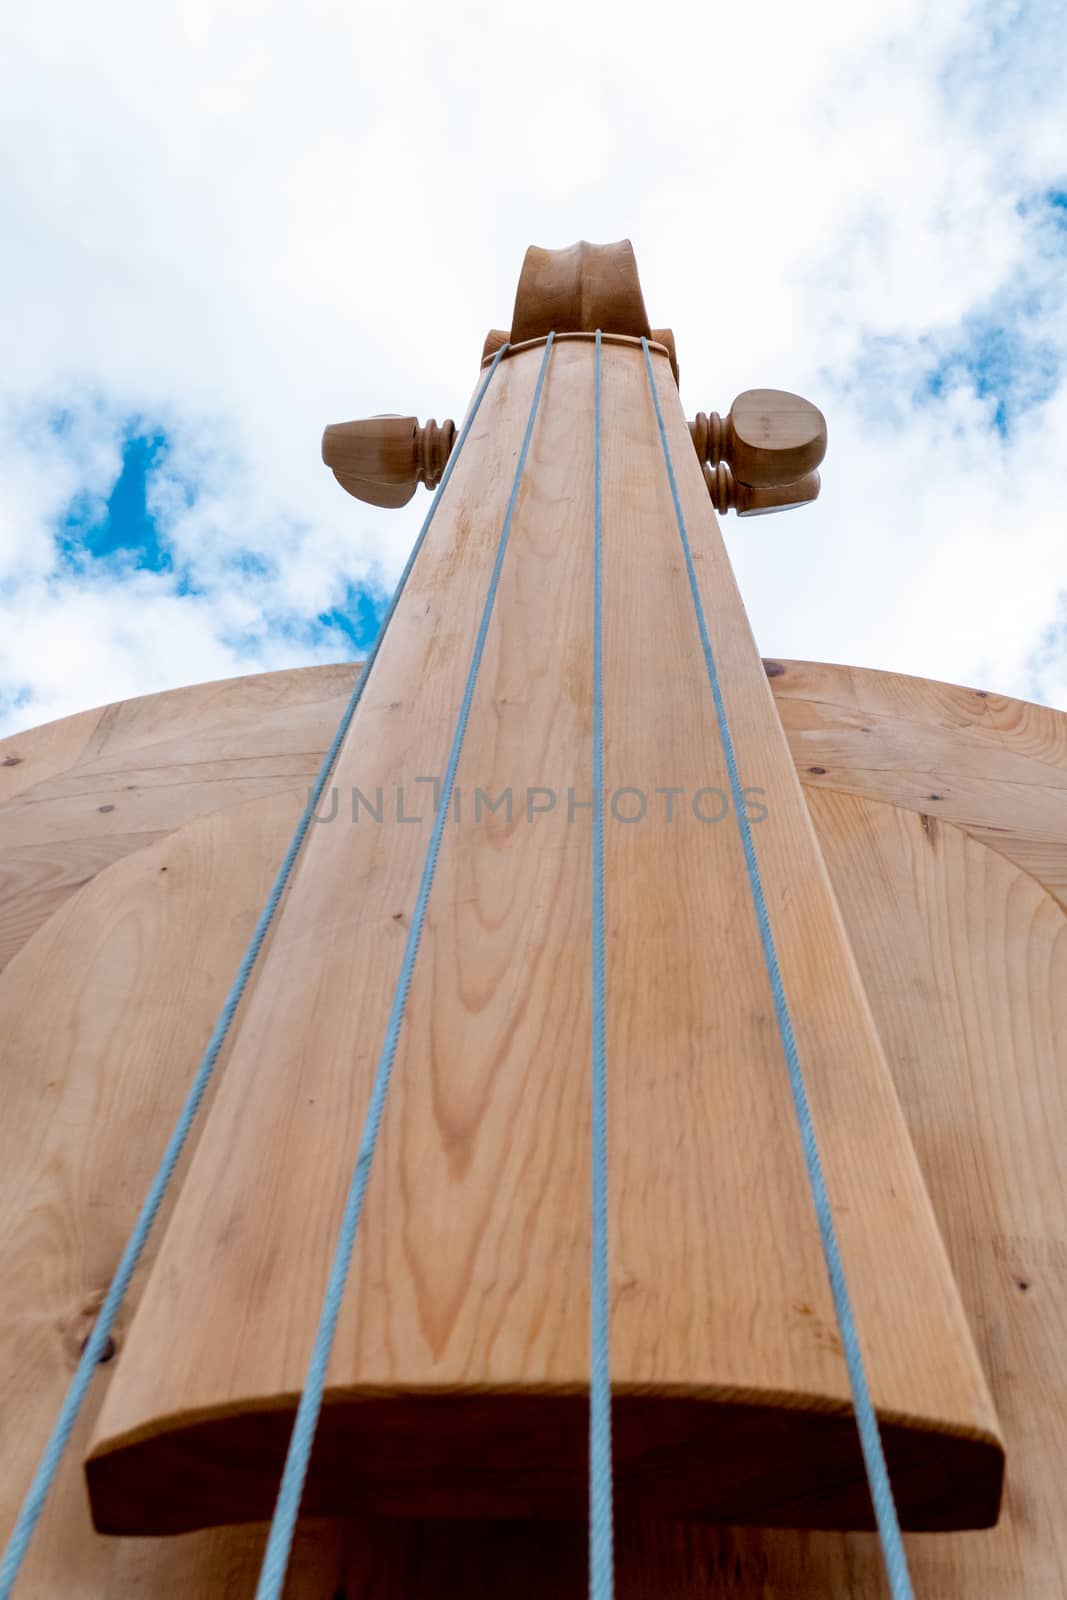 The fingerboard, sides and pegs of a huge violin or violin made of wood photographed from below against the sky.